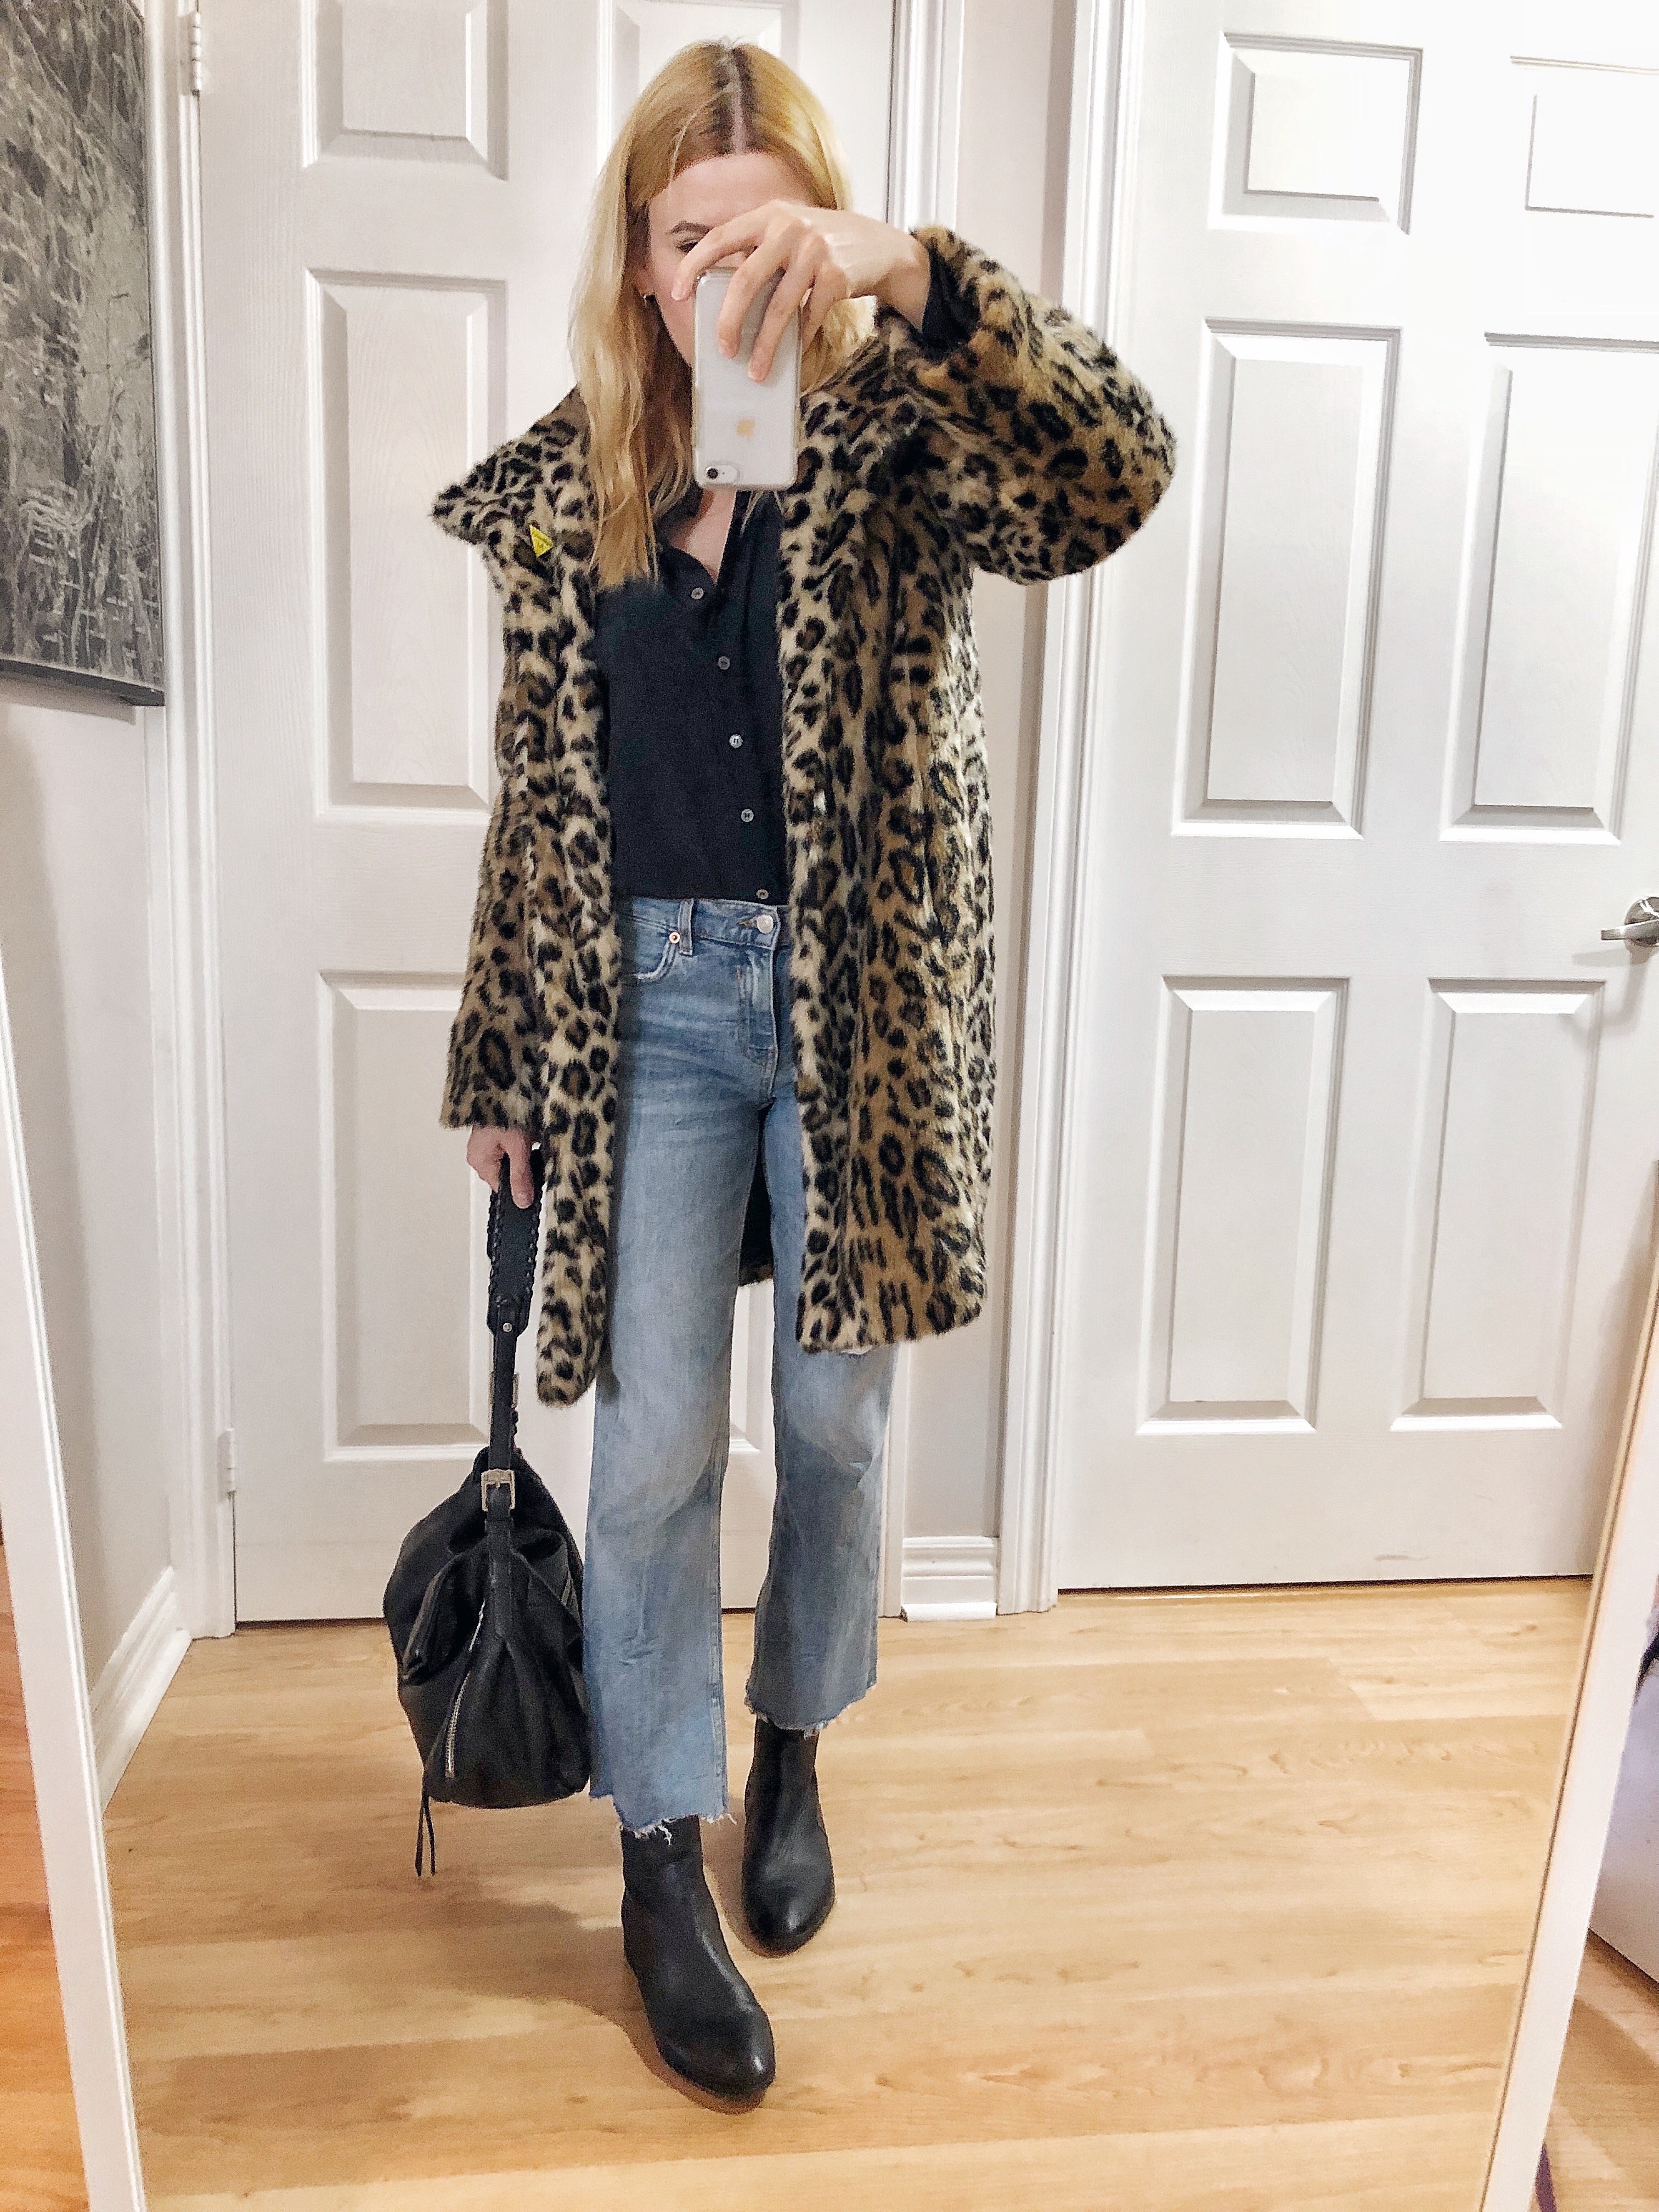 What I Wore. I am wearing a black silk blouse, cropped jeans, animal print jacket, and a black boots.